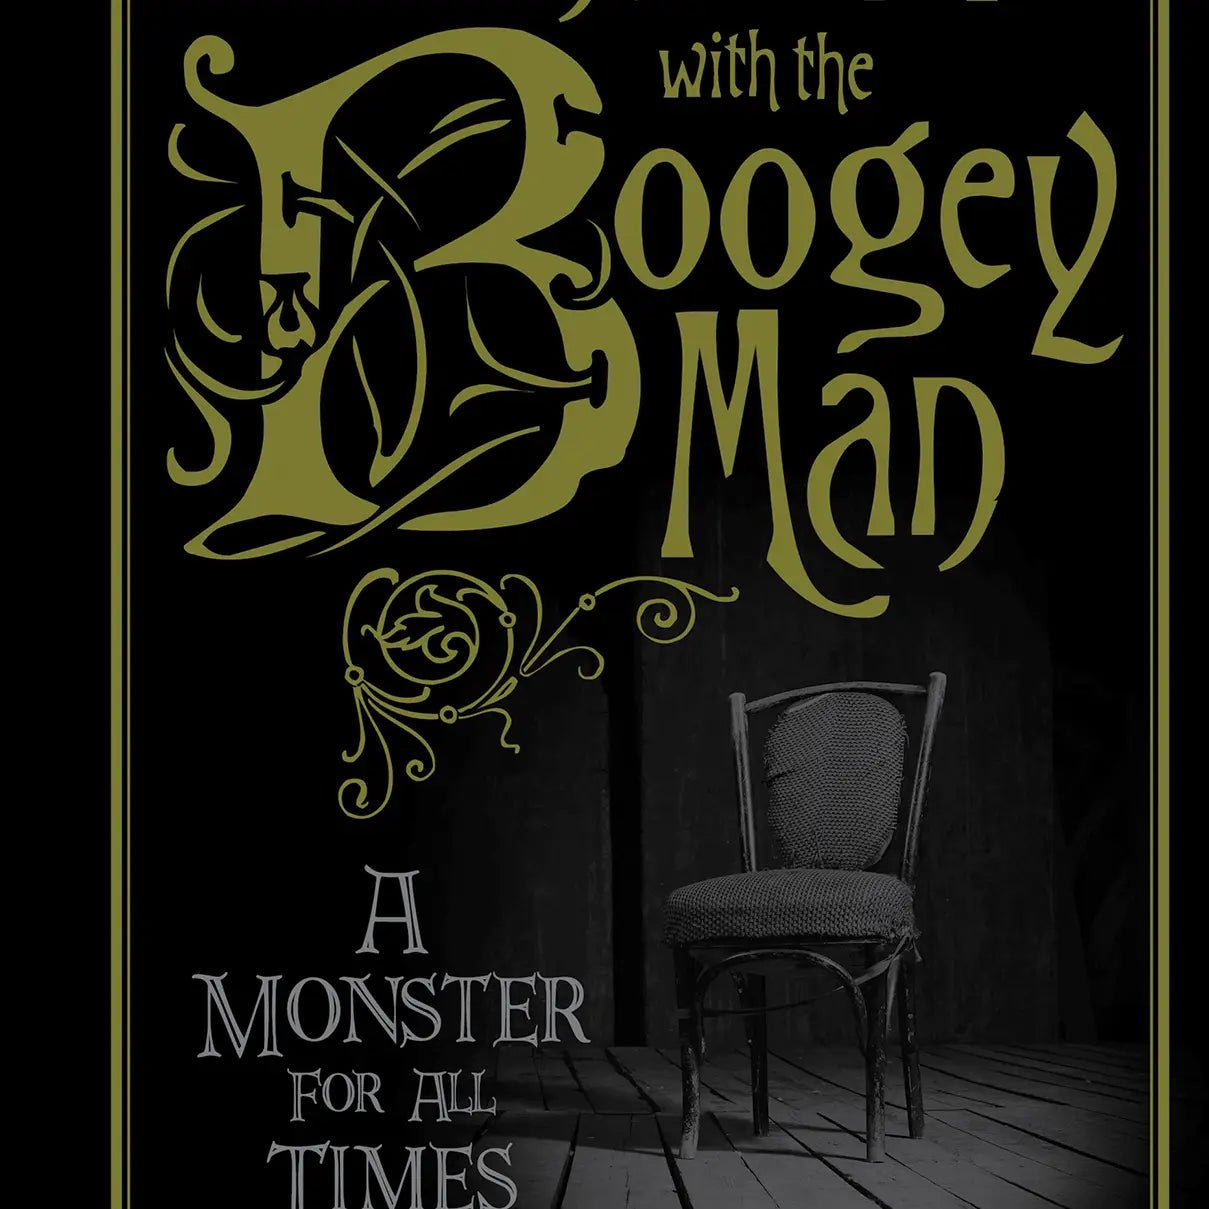 Interview with the Boogey Man - La Panthère Studio